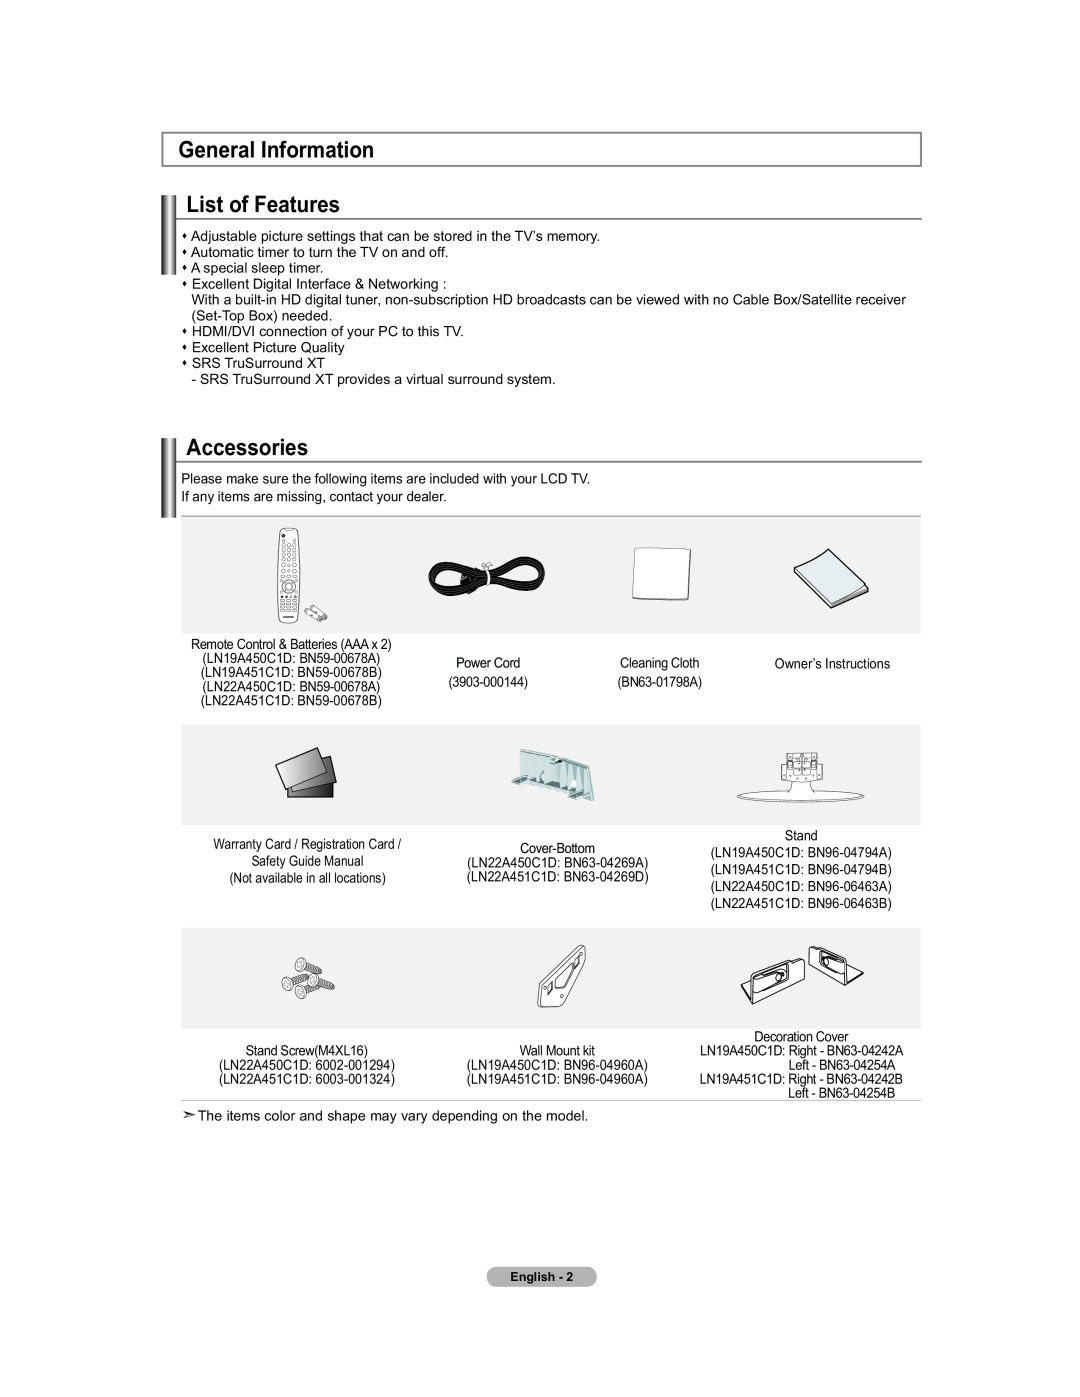 Samsung 451 user manual General Information List of Features, Accessories 